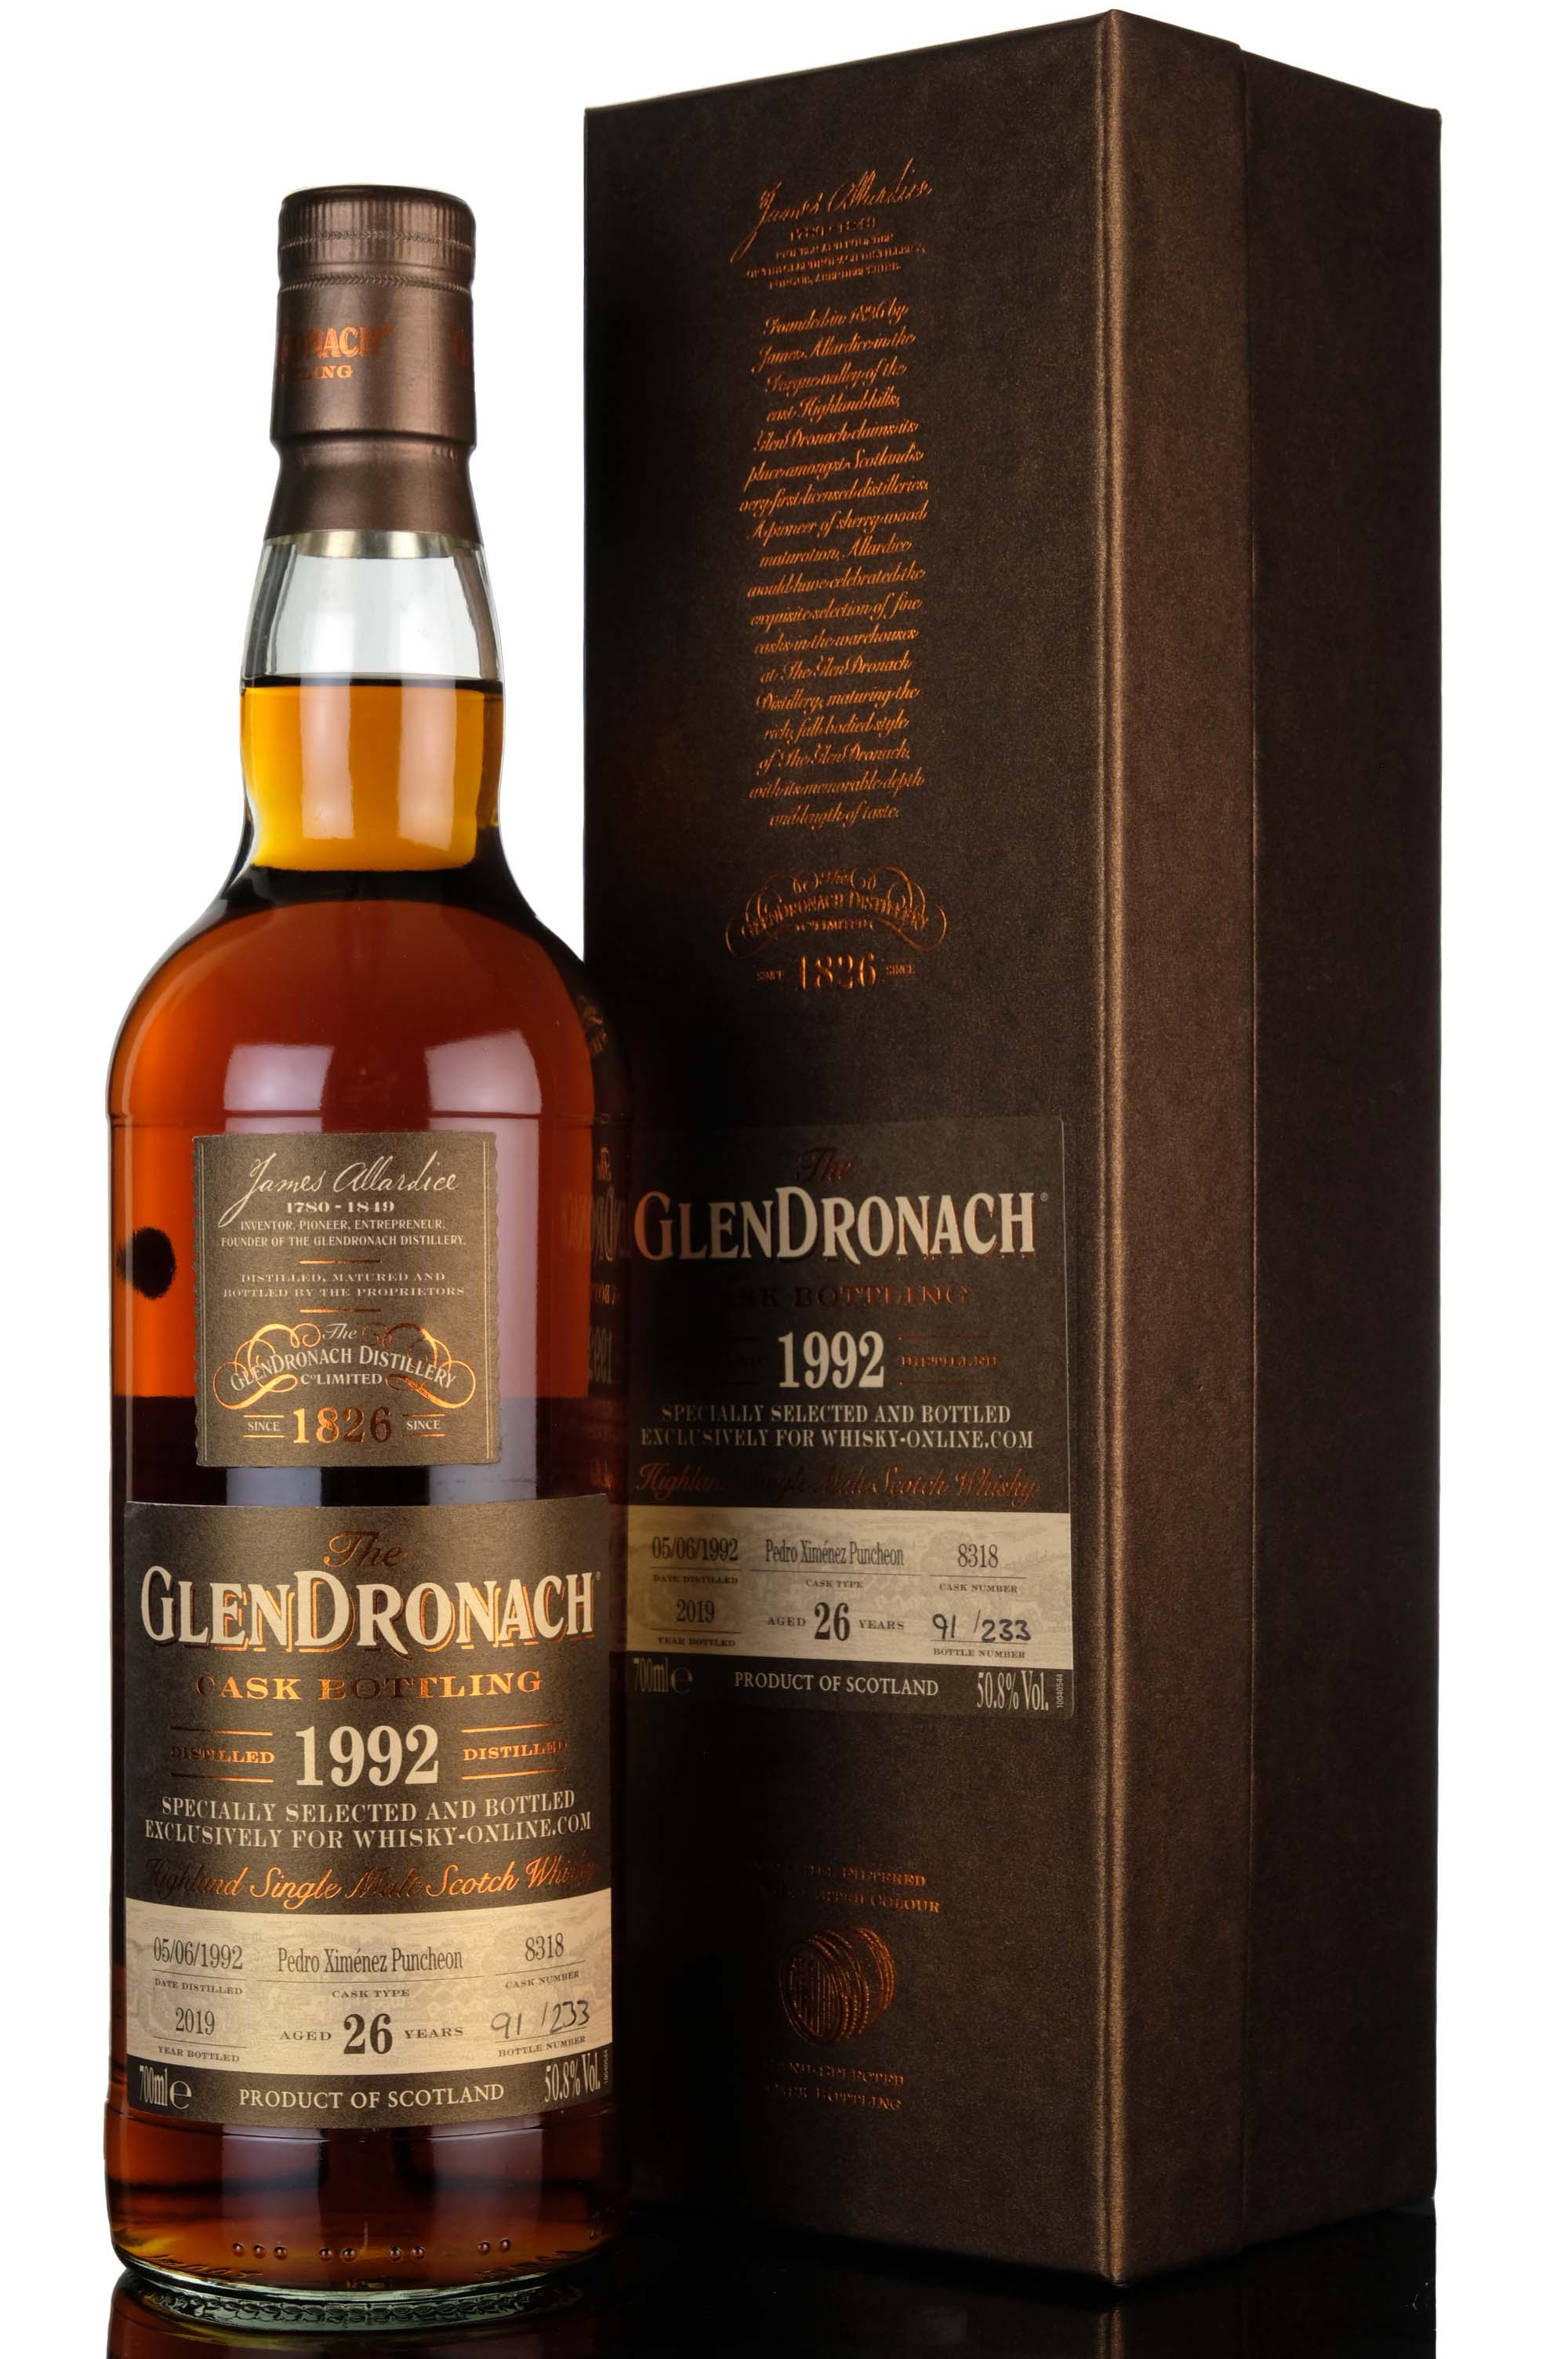 Glendronach 1992-2019 - 26 Year Old - Single Cask 8318 - Whisky-Online Exclusive